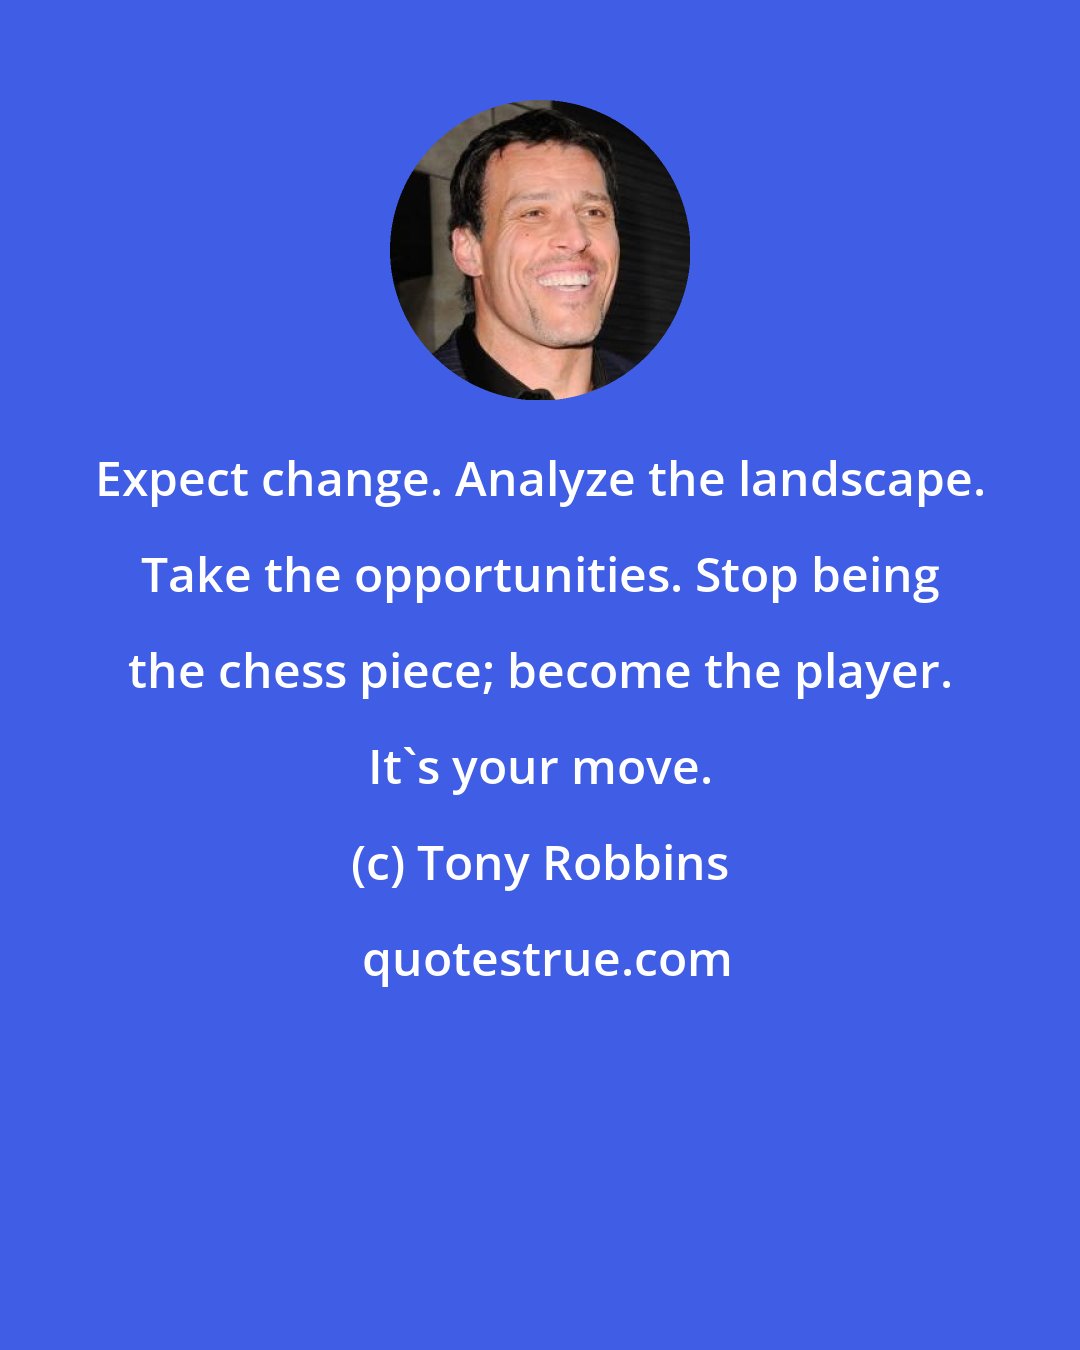 Tony Robbins: Expect change. Analyze the landscape. Take the opportunities. Stop being the chess piece; become the player. It's your move.